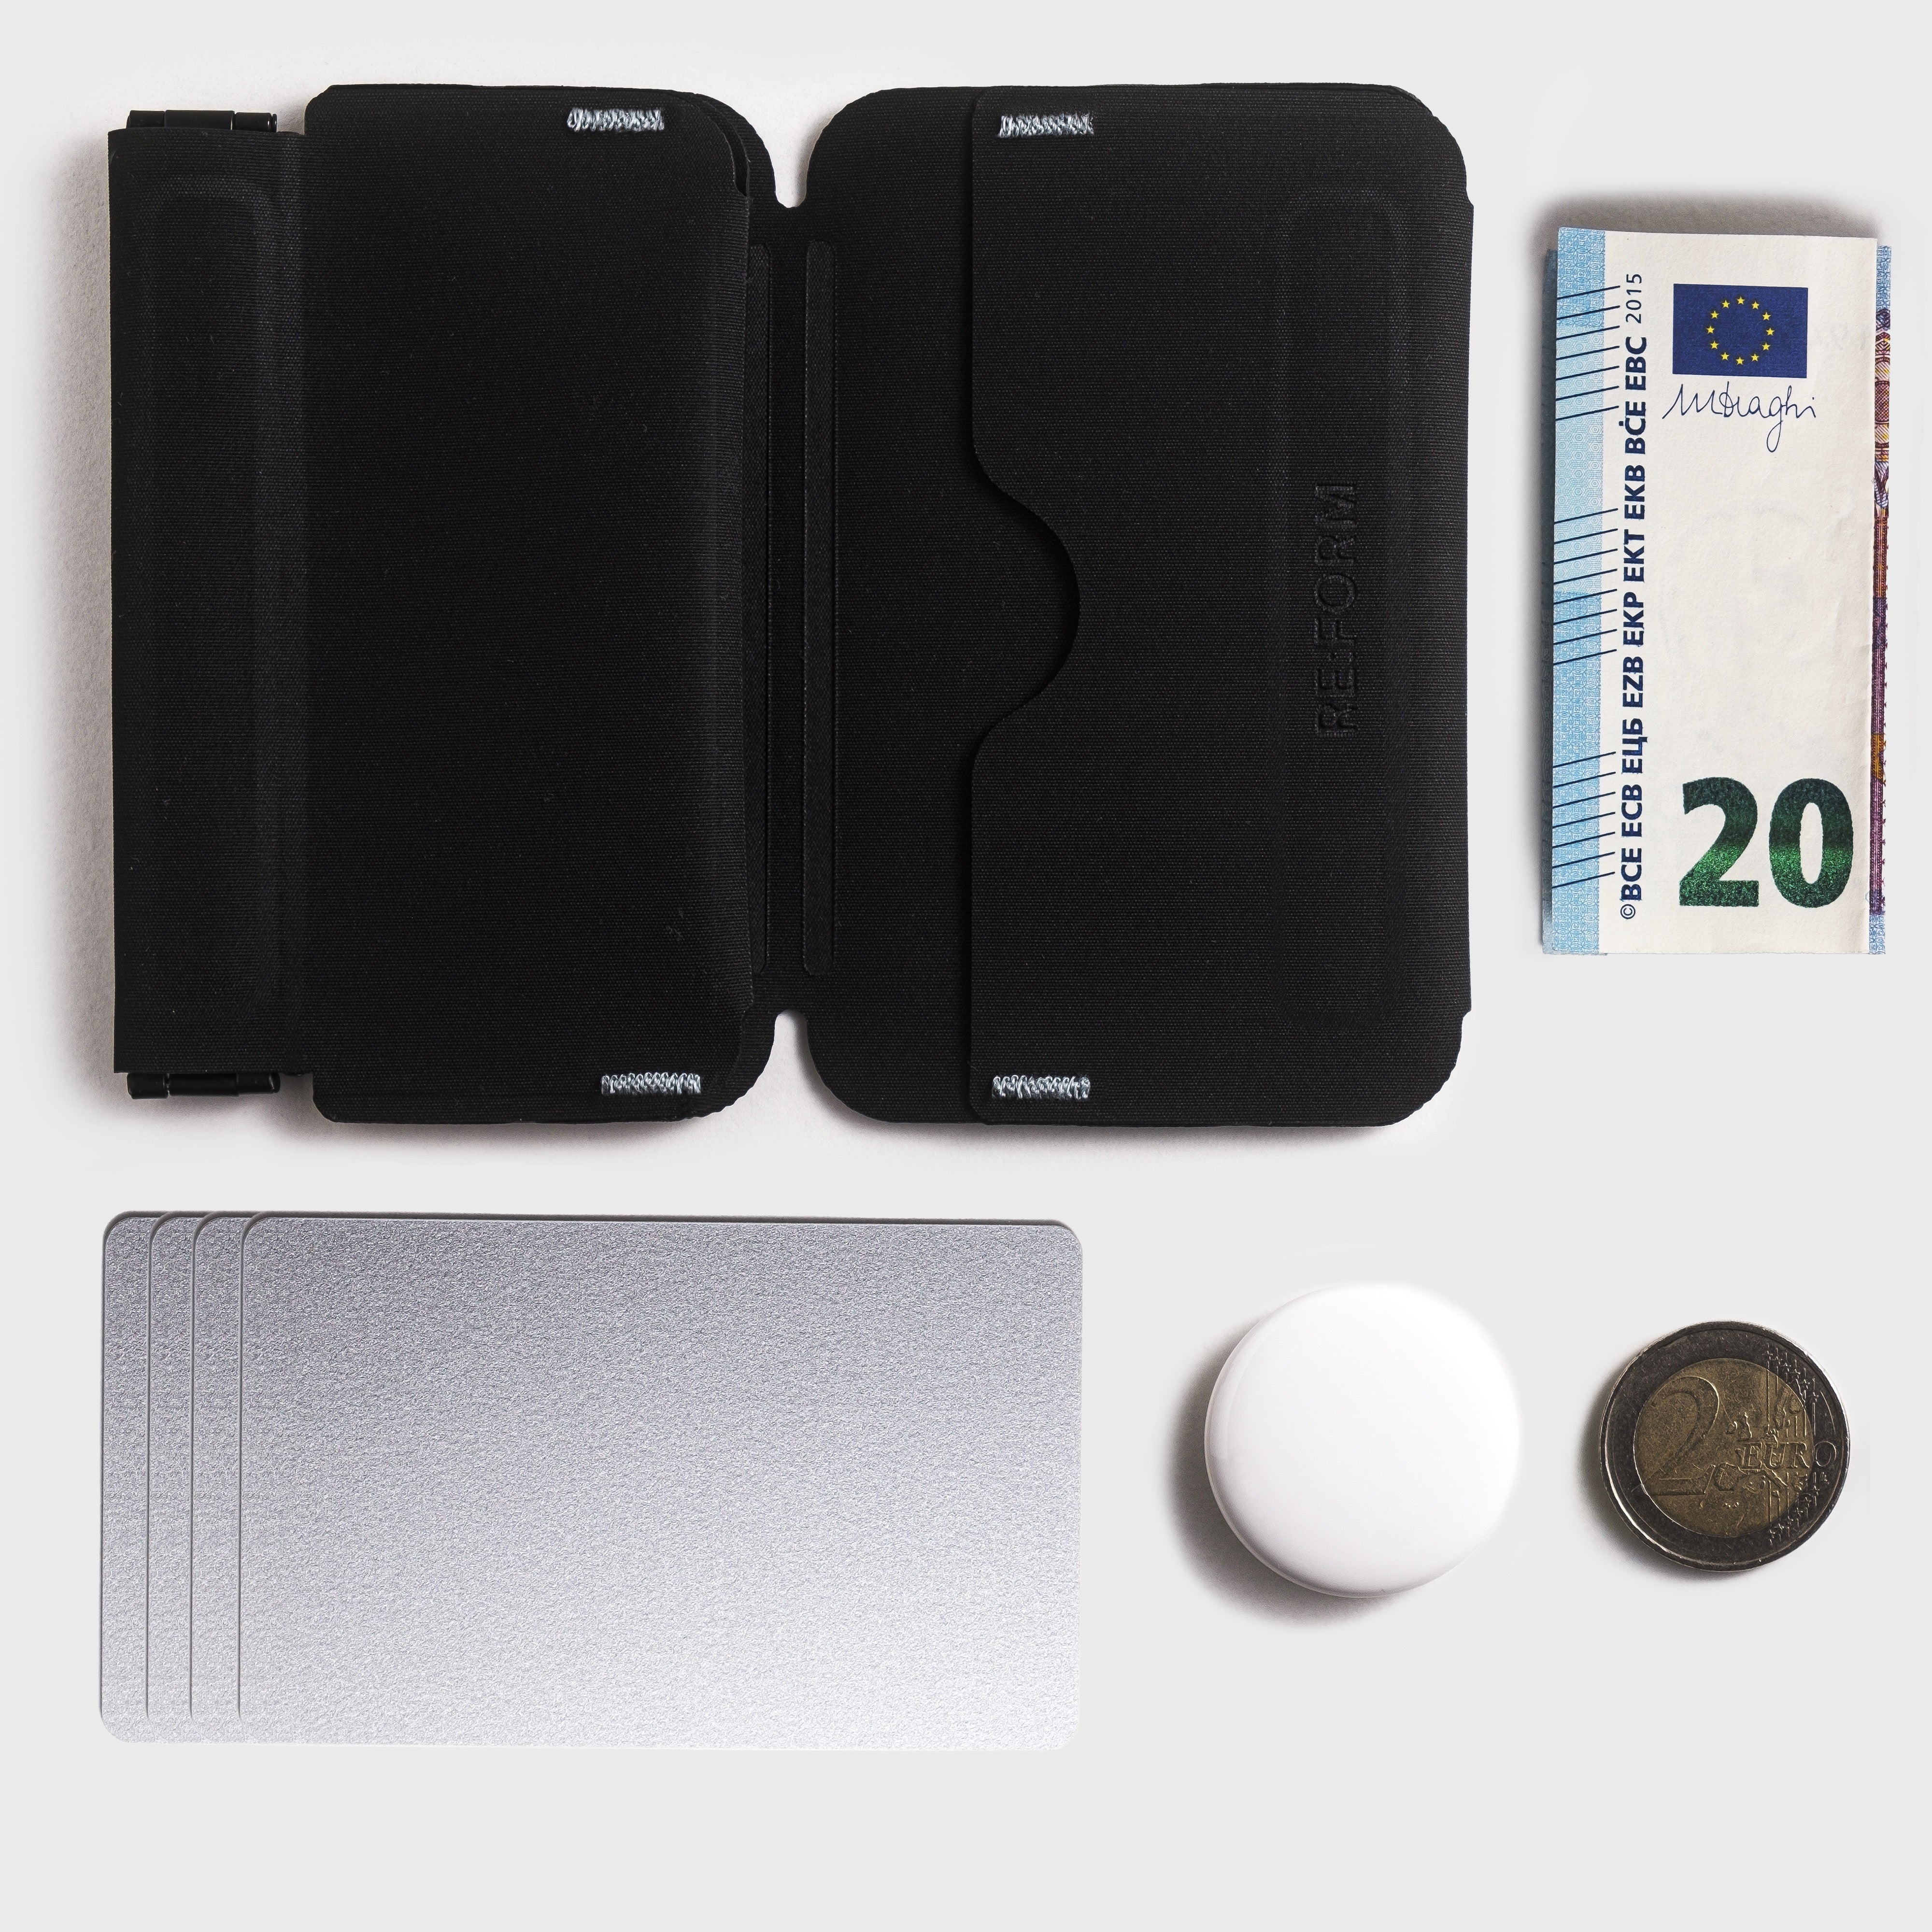 Coins, Cards, Cash and Apple AirTag fit into the RE:FORM RE:01 Coin Sleeve Wallet